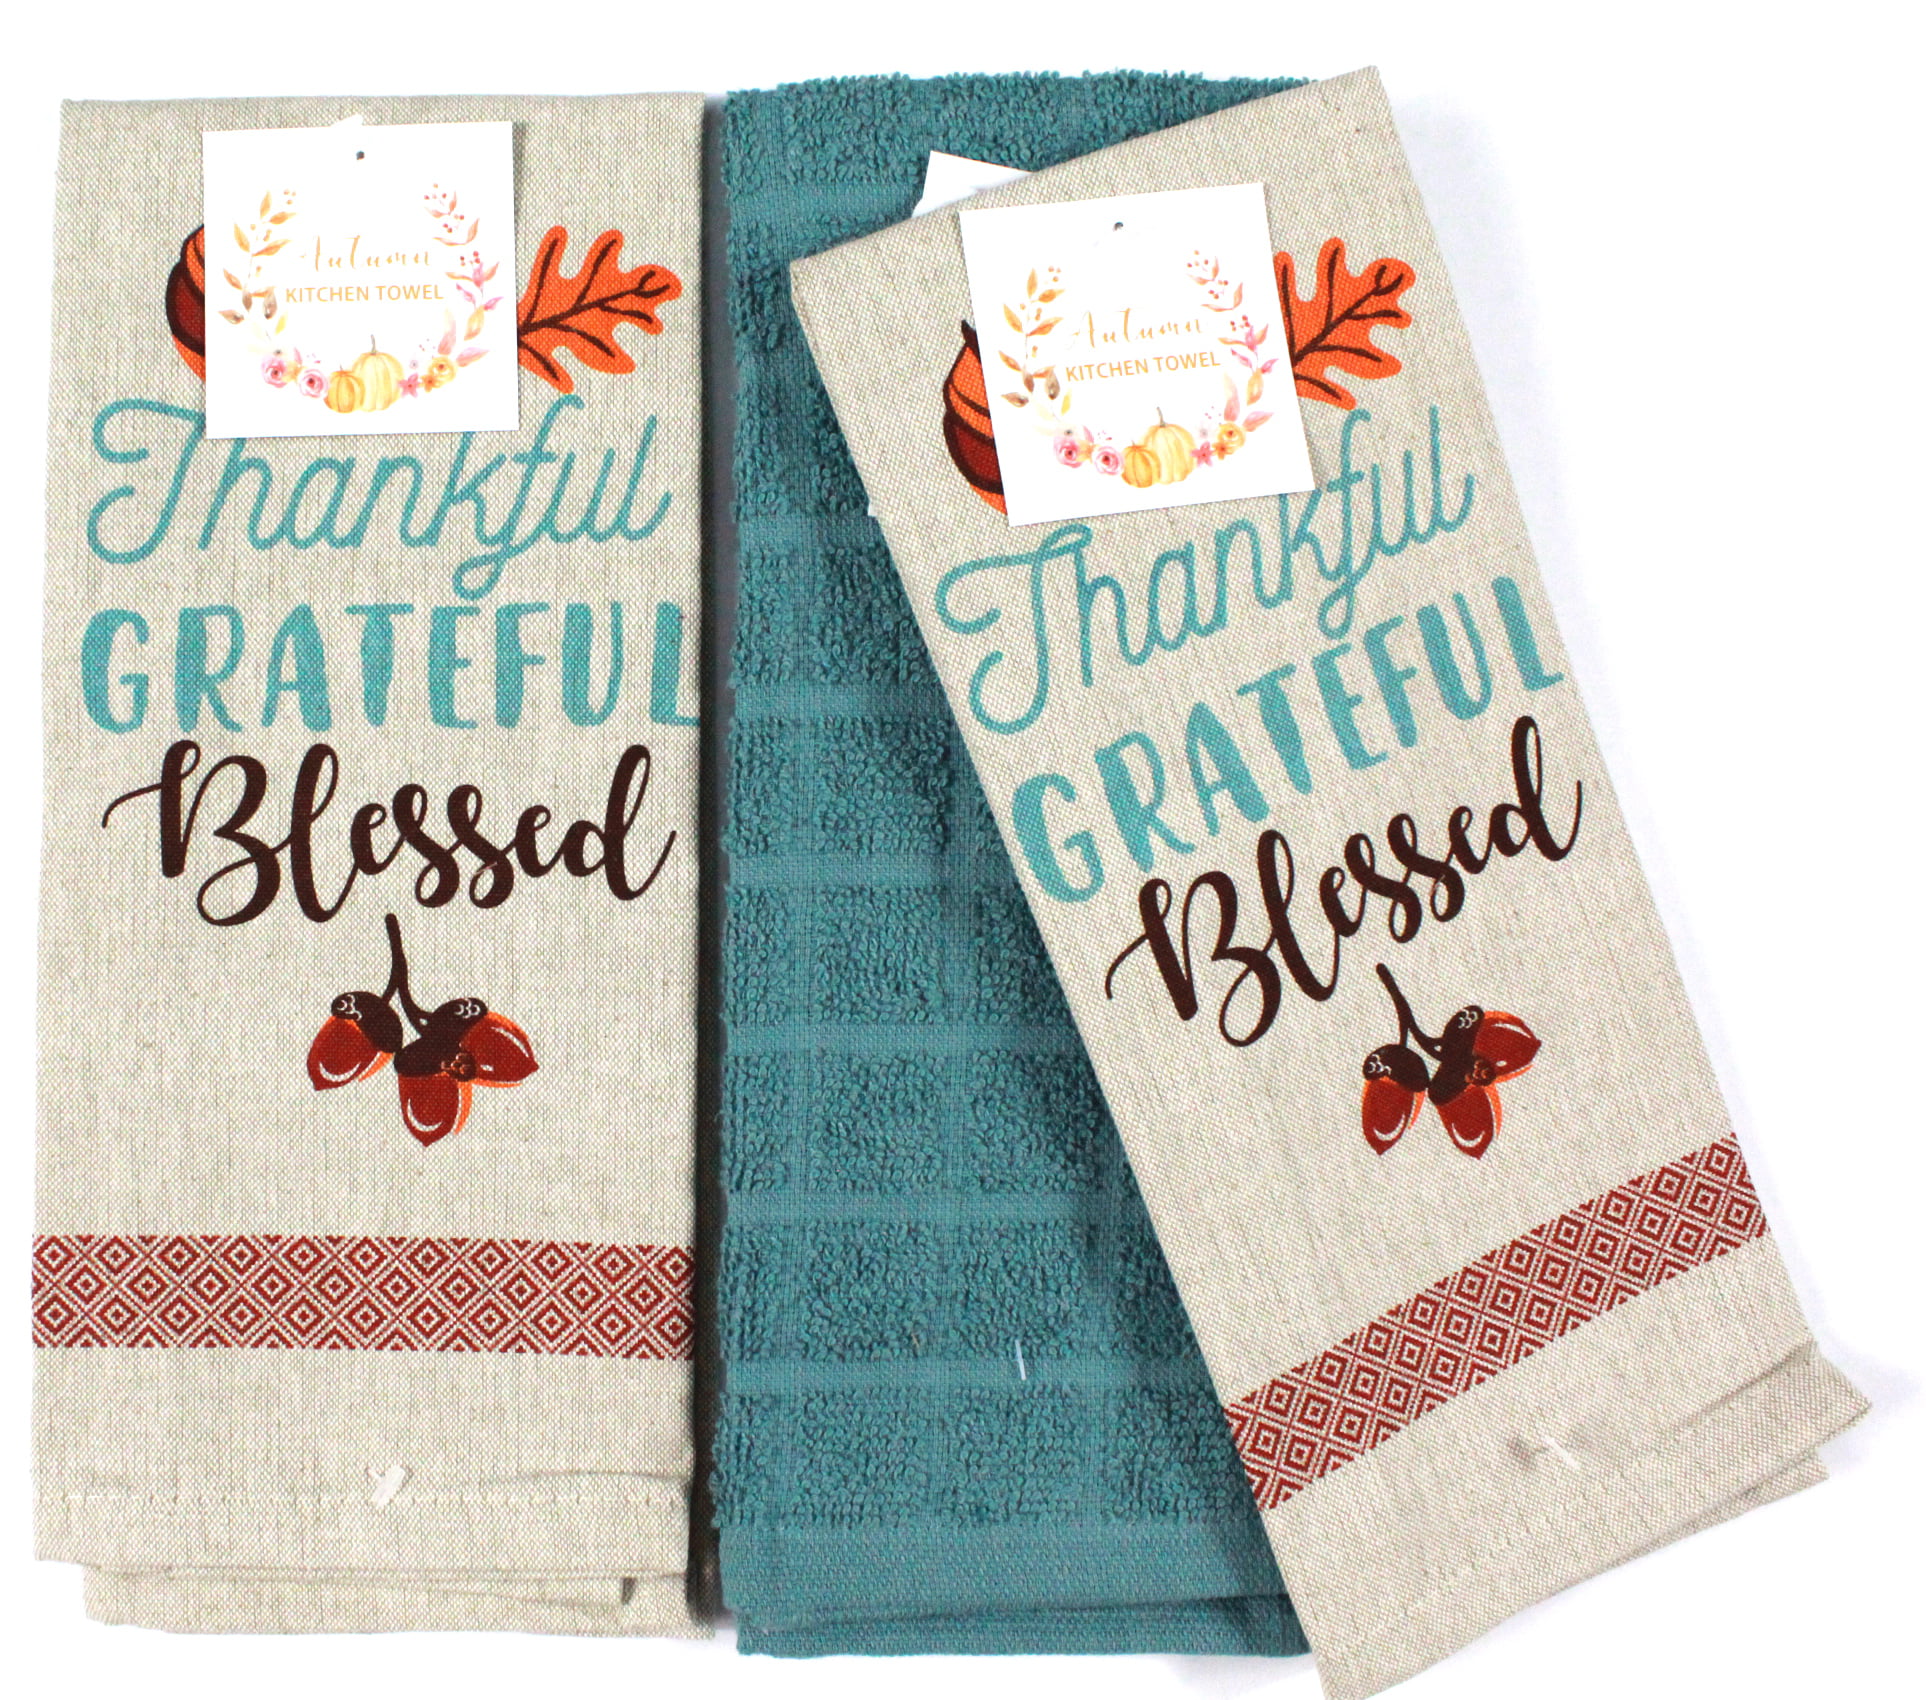 THANKFUL GRATEFUL BLESSED ON BROWN 3 SAME PRINTED KITCHEN TOWELS 15" x 25" GR 